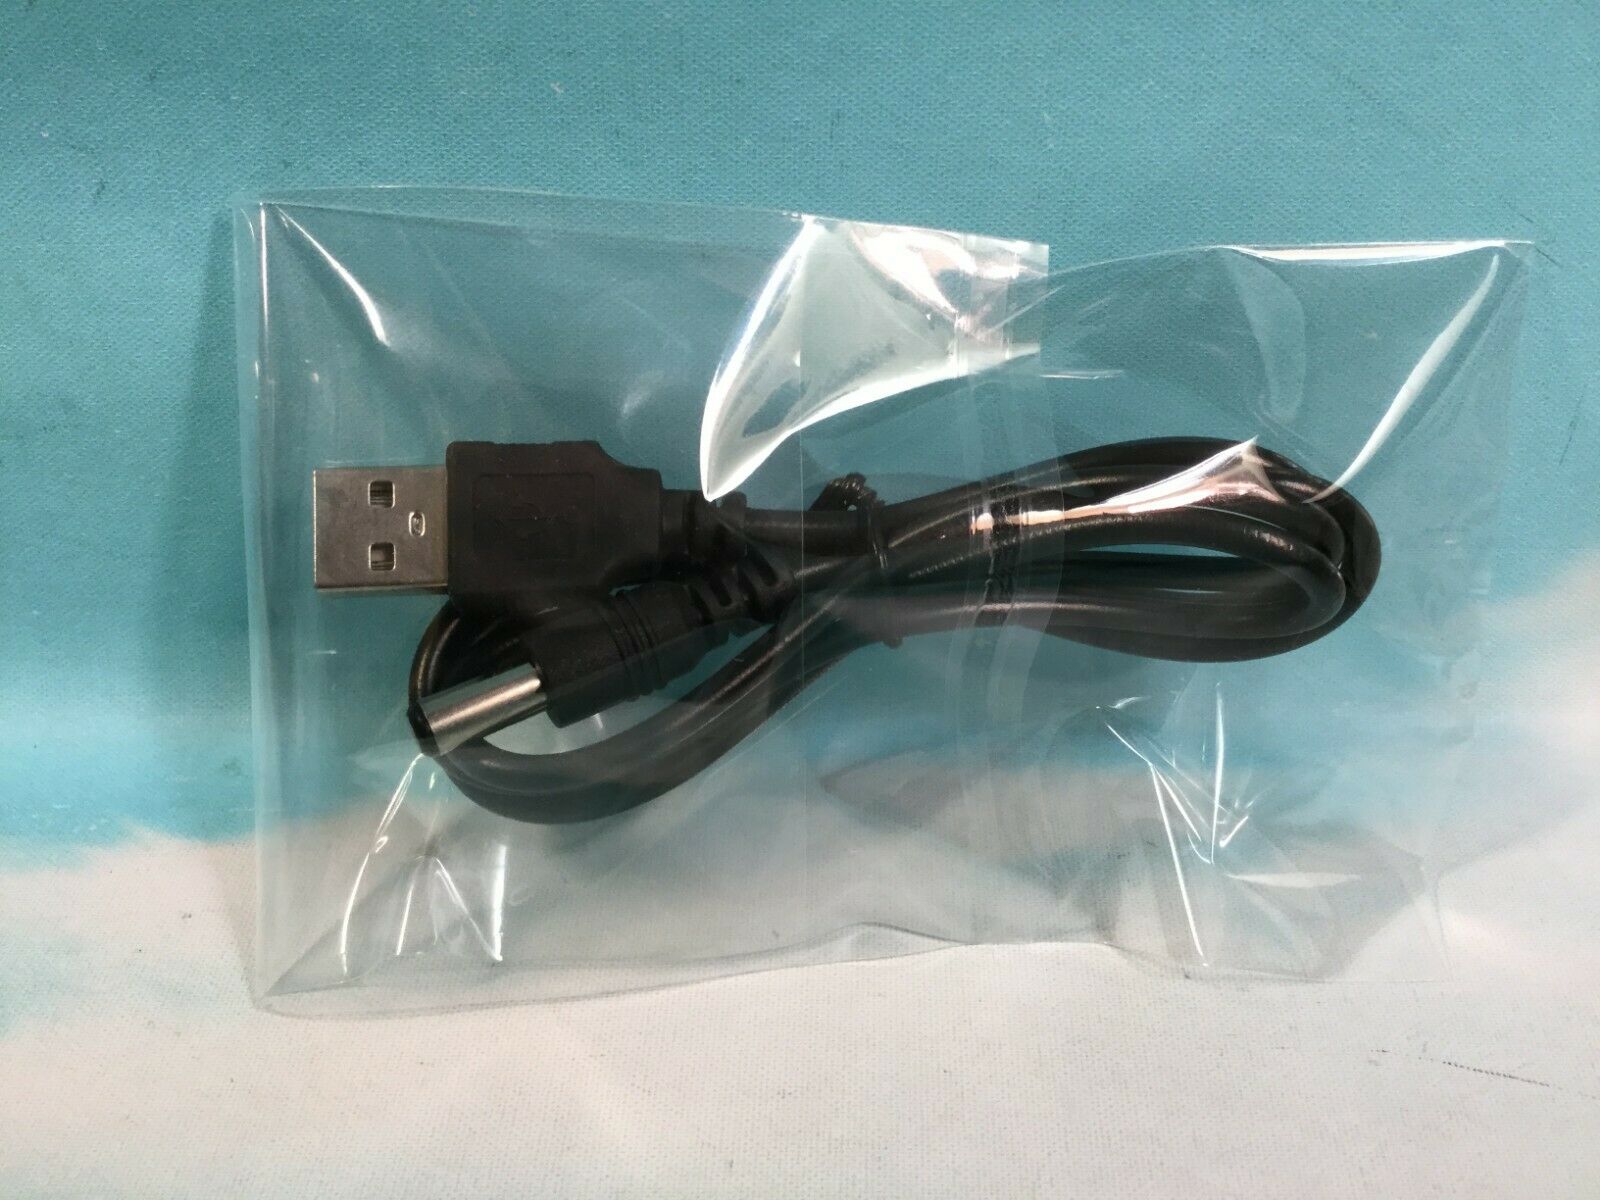 Promark P70-vr & P70-cw Warrior & Shadow Drone Usb Charging Cable 32"  Long 5v